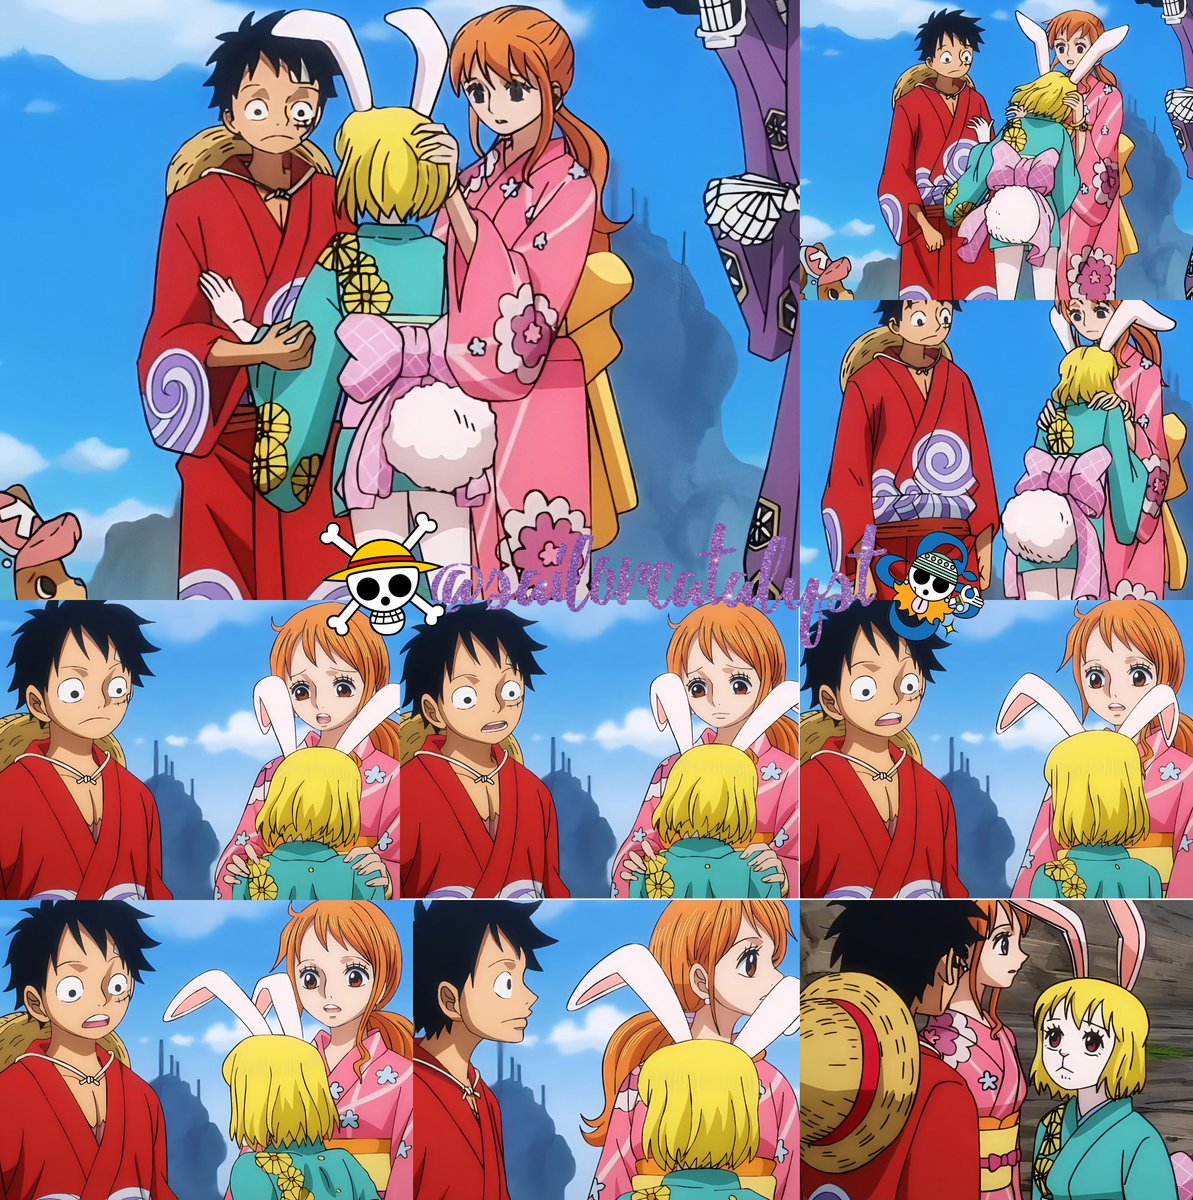 Look how cute they are acting like carrot's parents while she cries like a baby, i'm highly convinced carrot is the older sister and o-tama is the younger sister in #lunami family☺

#lunami #luffyxnami #namixluffy #ONEPIECE1084 #ONEPIECE #ナミ #ルフィ #ルナミ #ワンピース